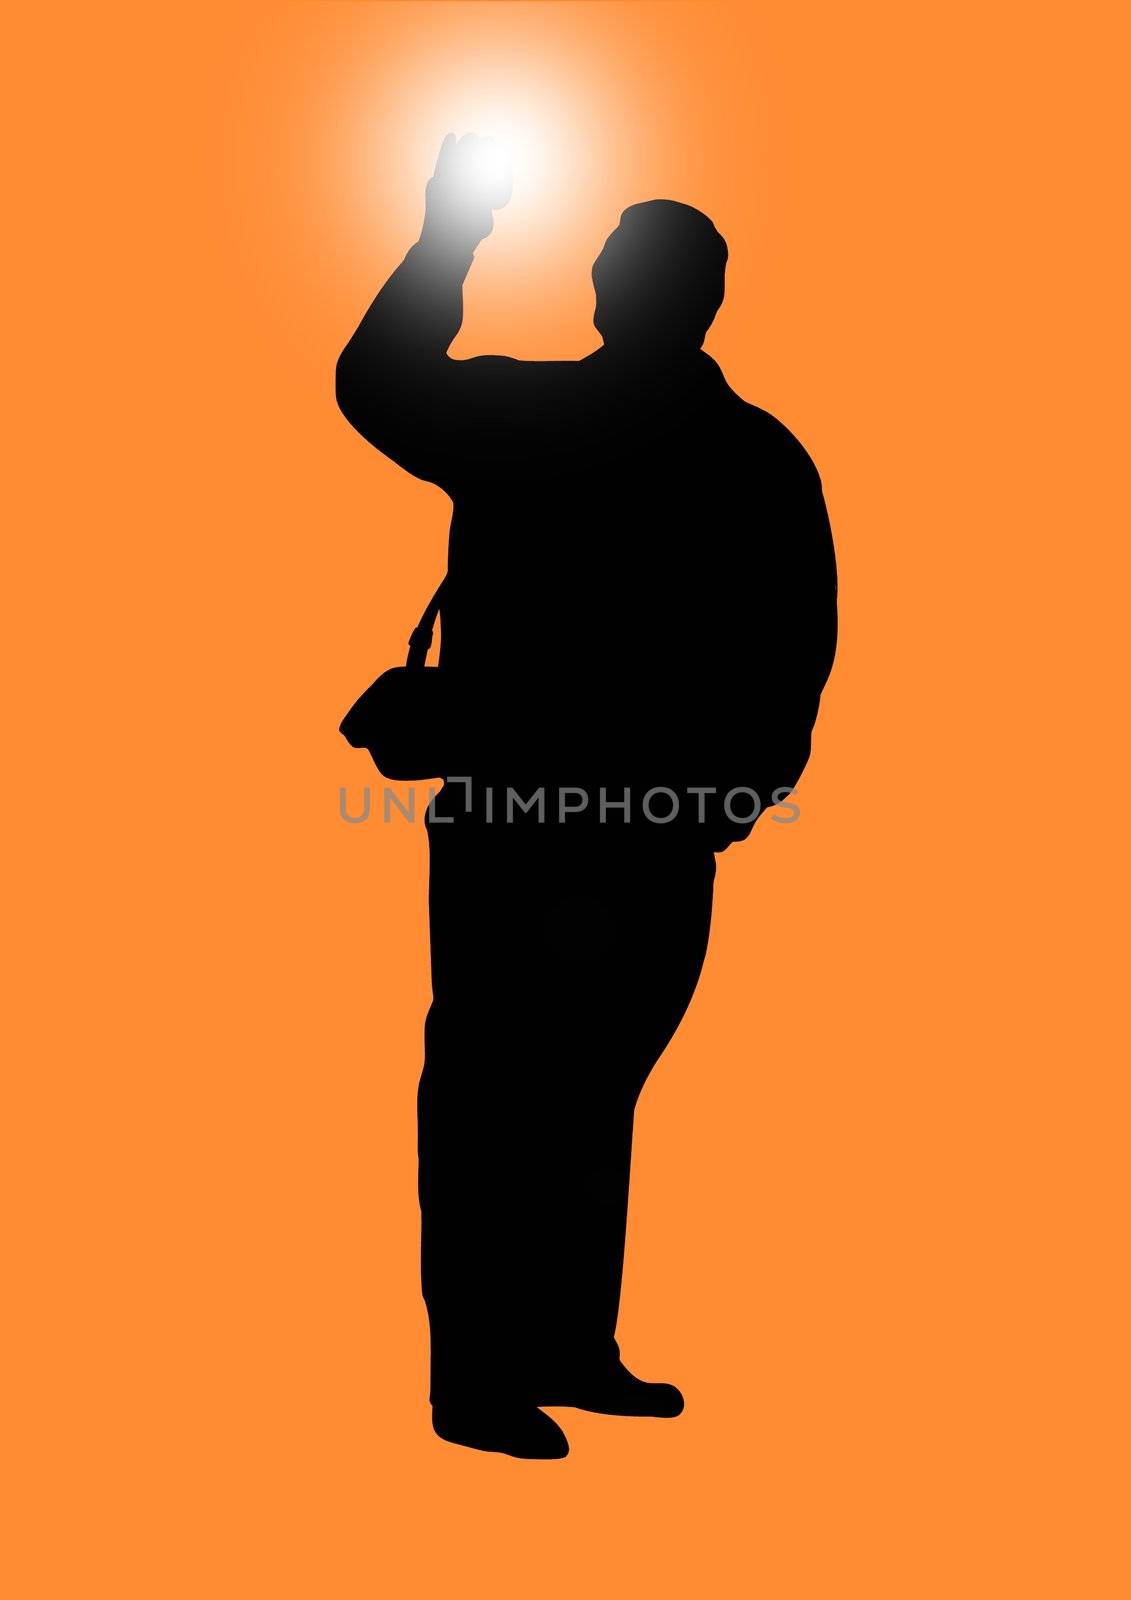 Illustration of a person taking photos